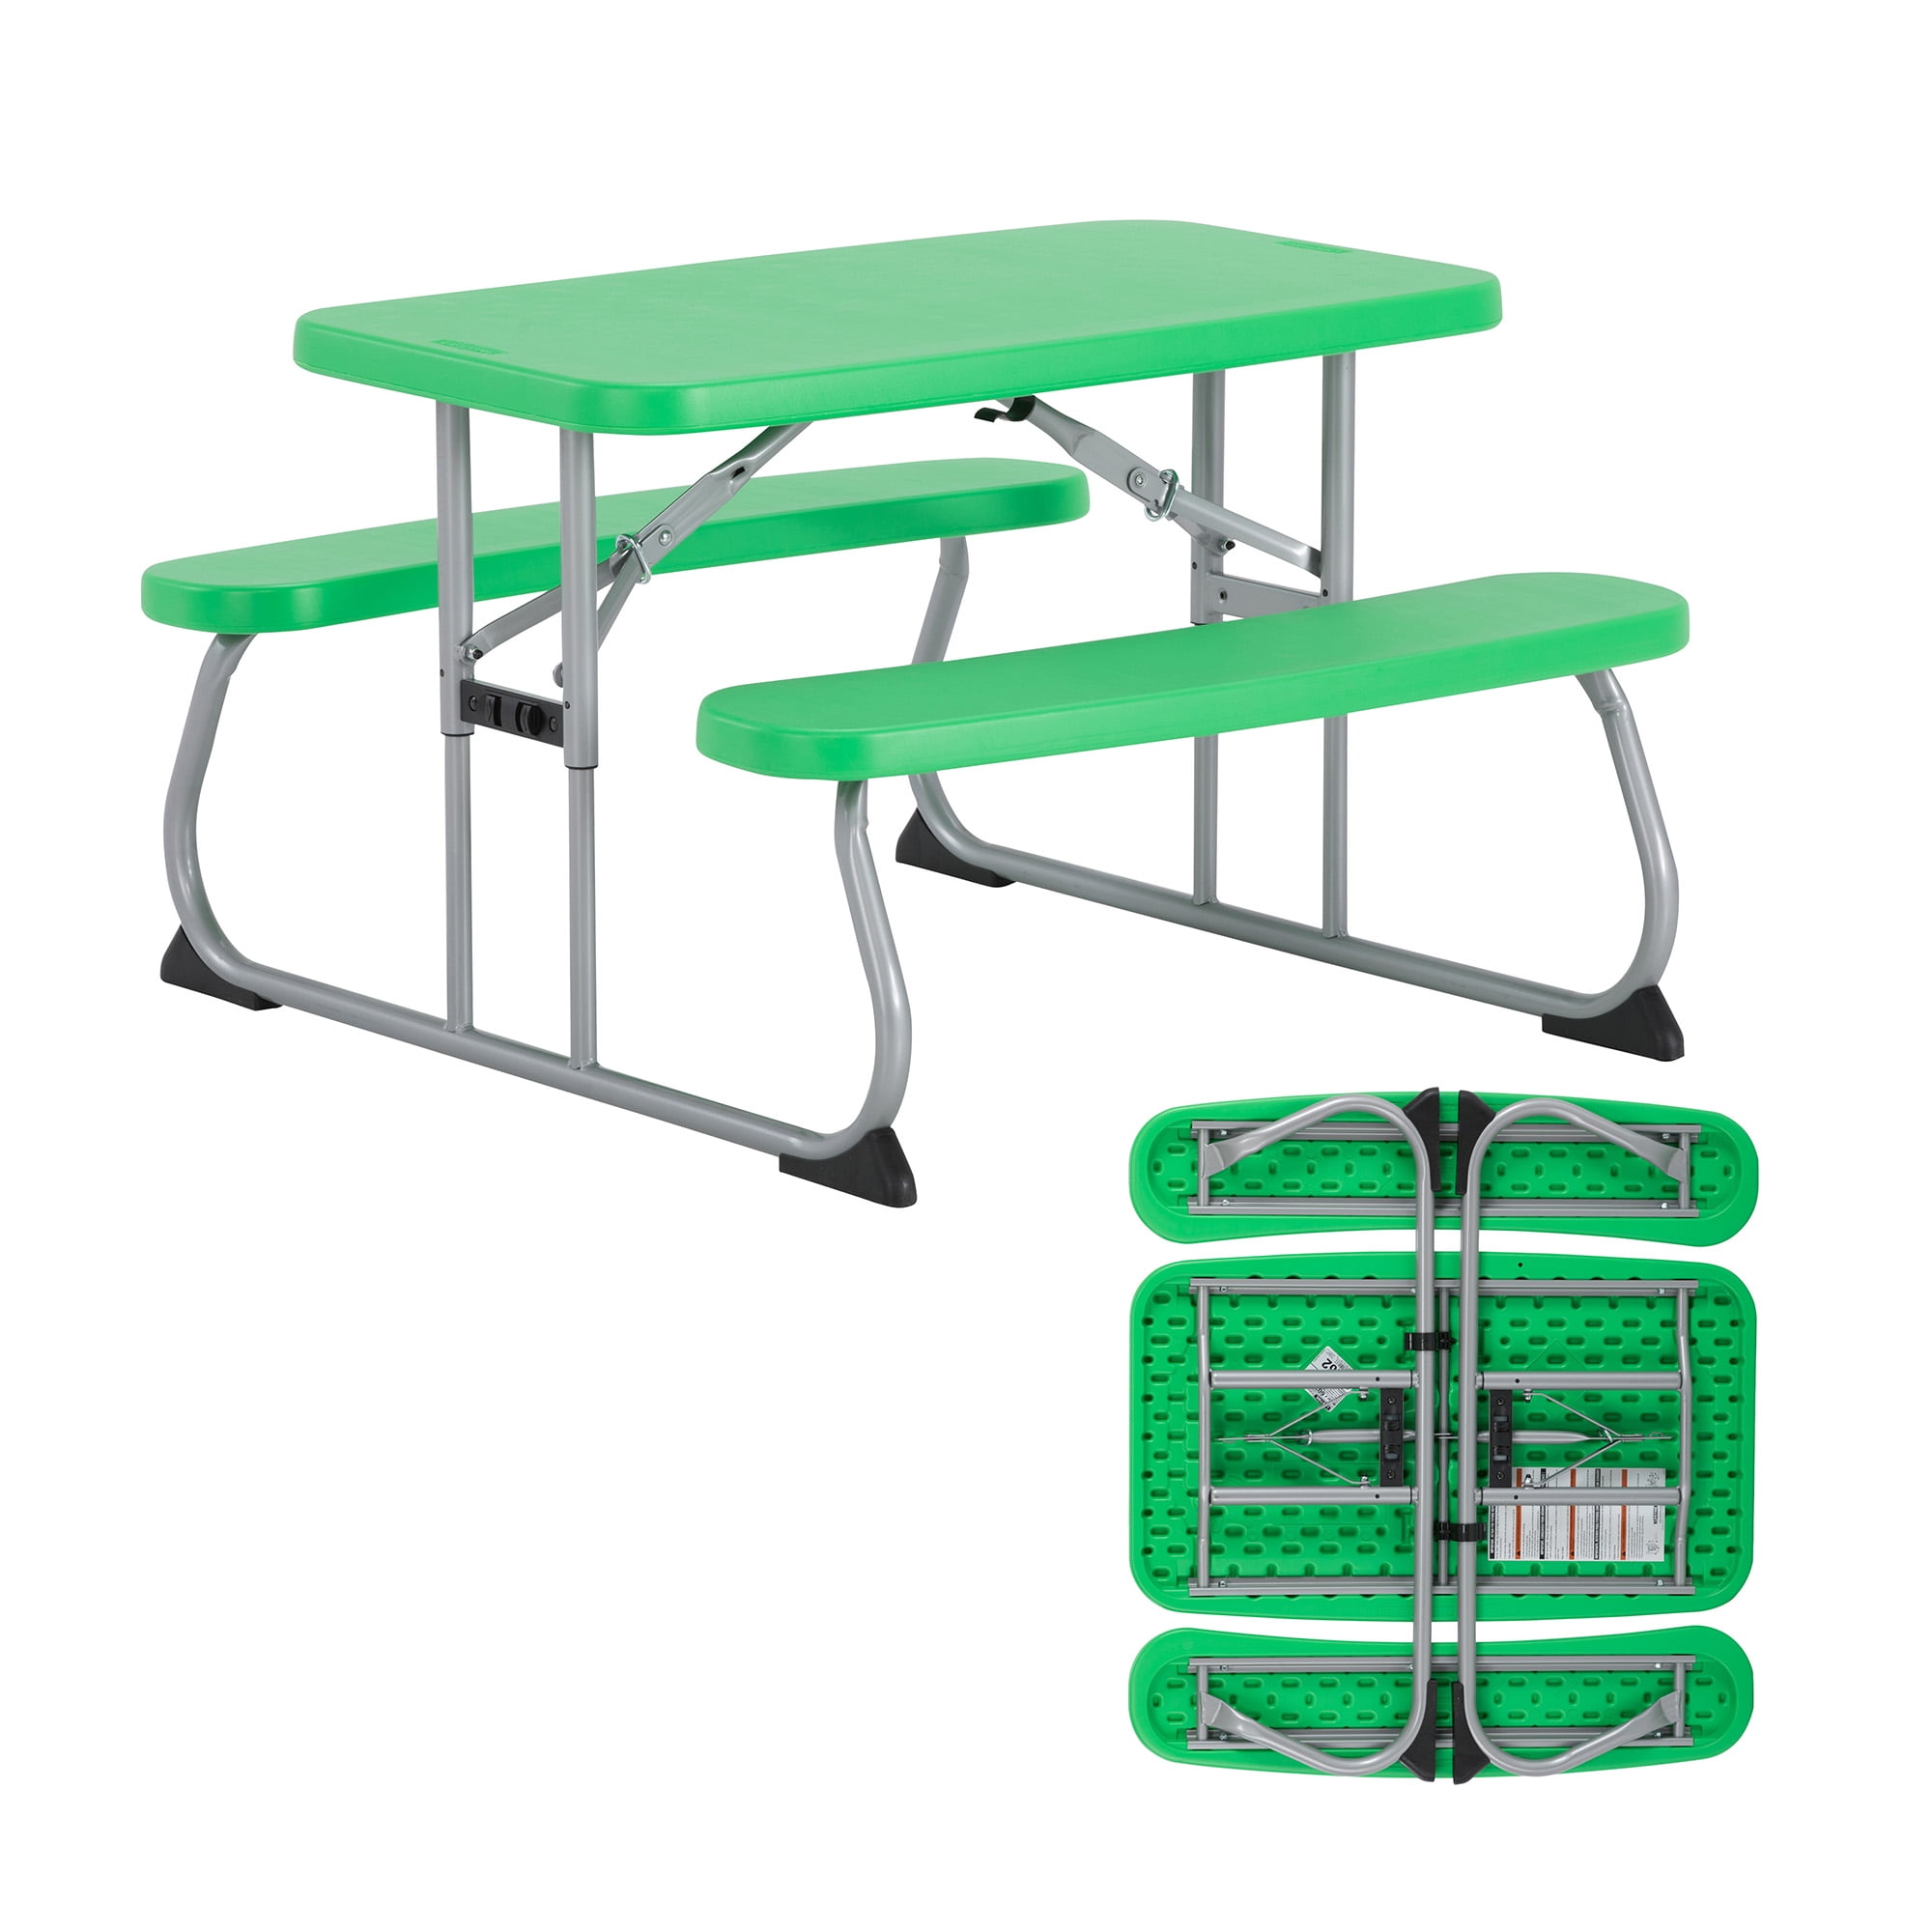 Lifetime Kids' Picnic Table (Various) from $59 + Free Shipping for Plus Members